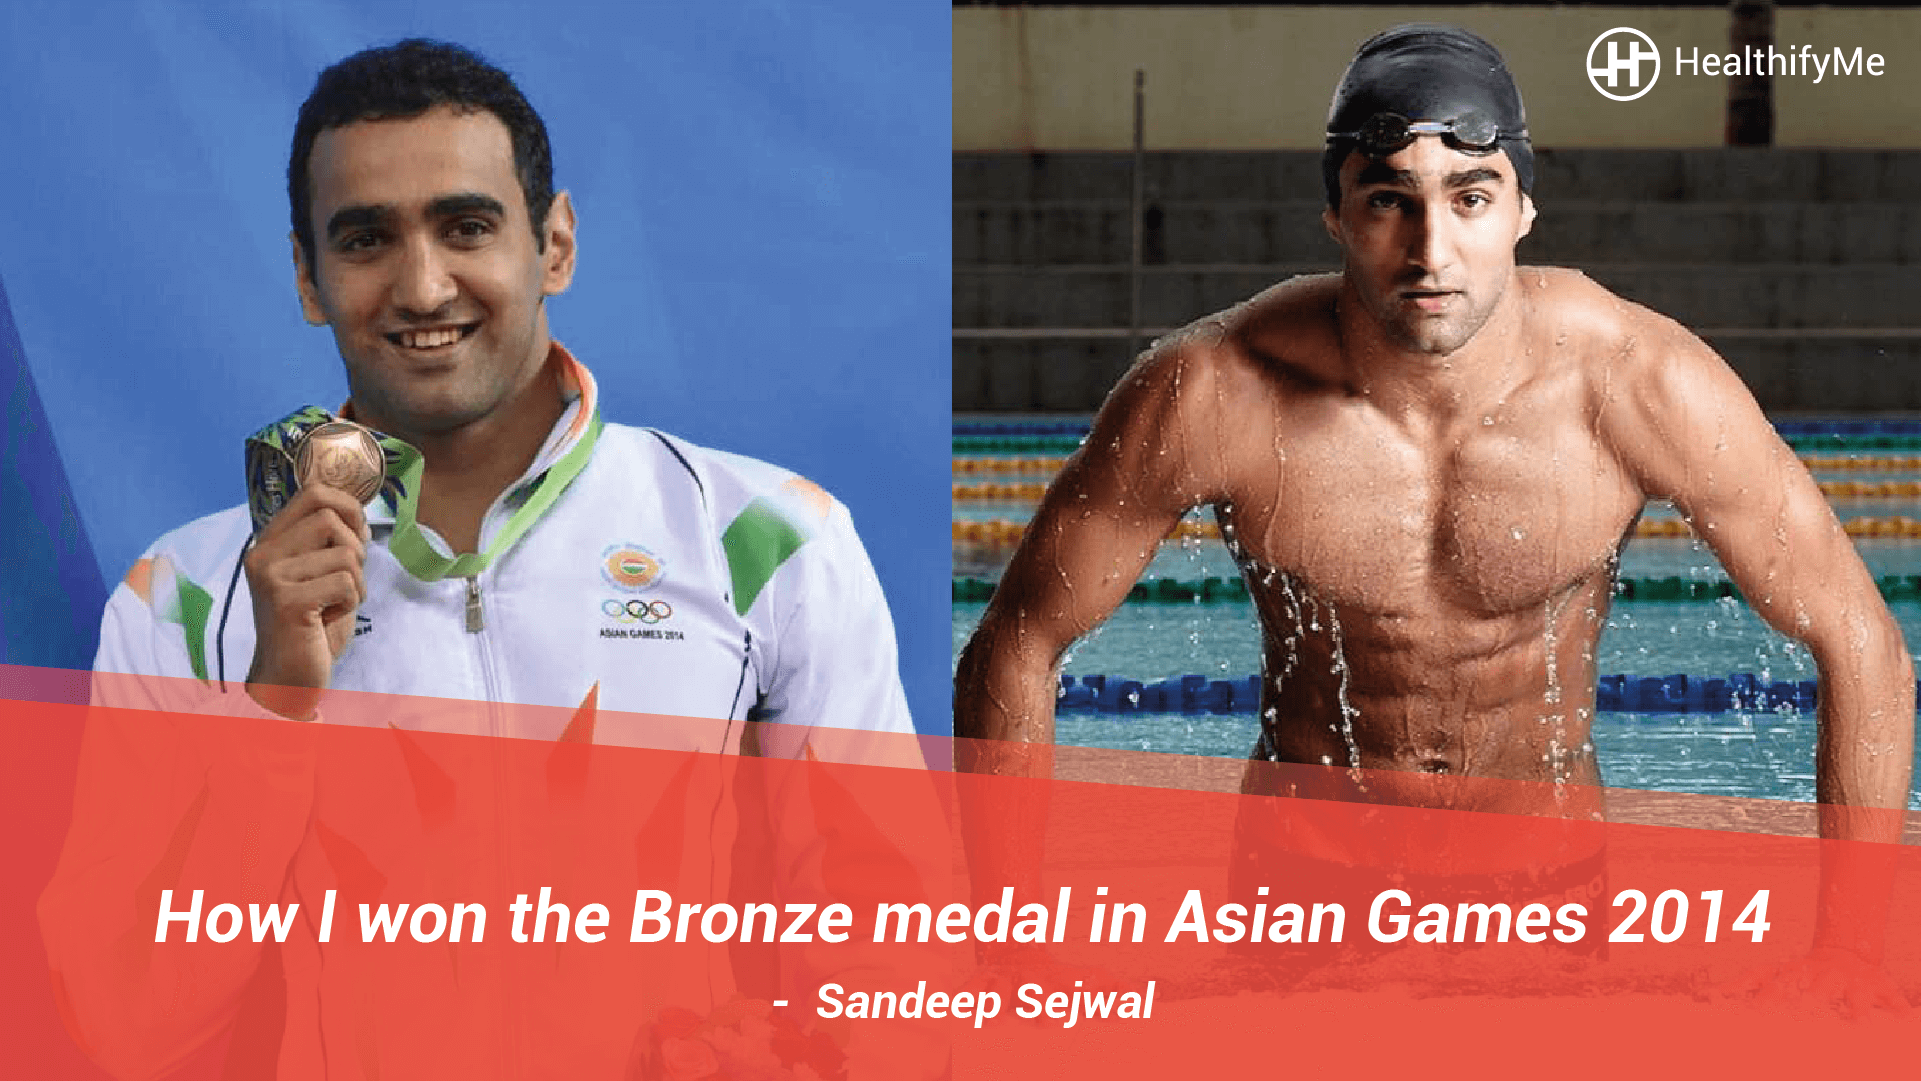 Sandeep Sejwal talks about winning the bronze medal